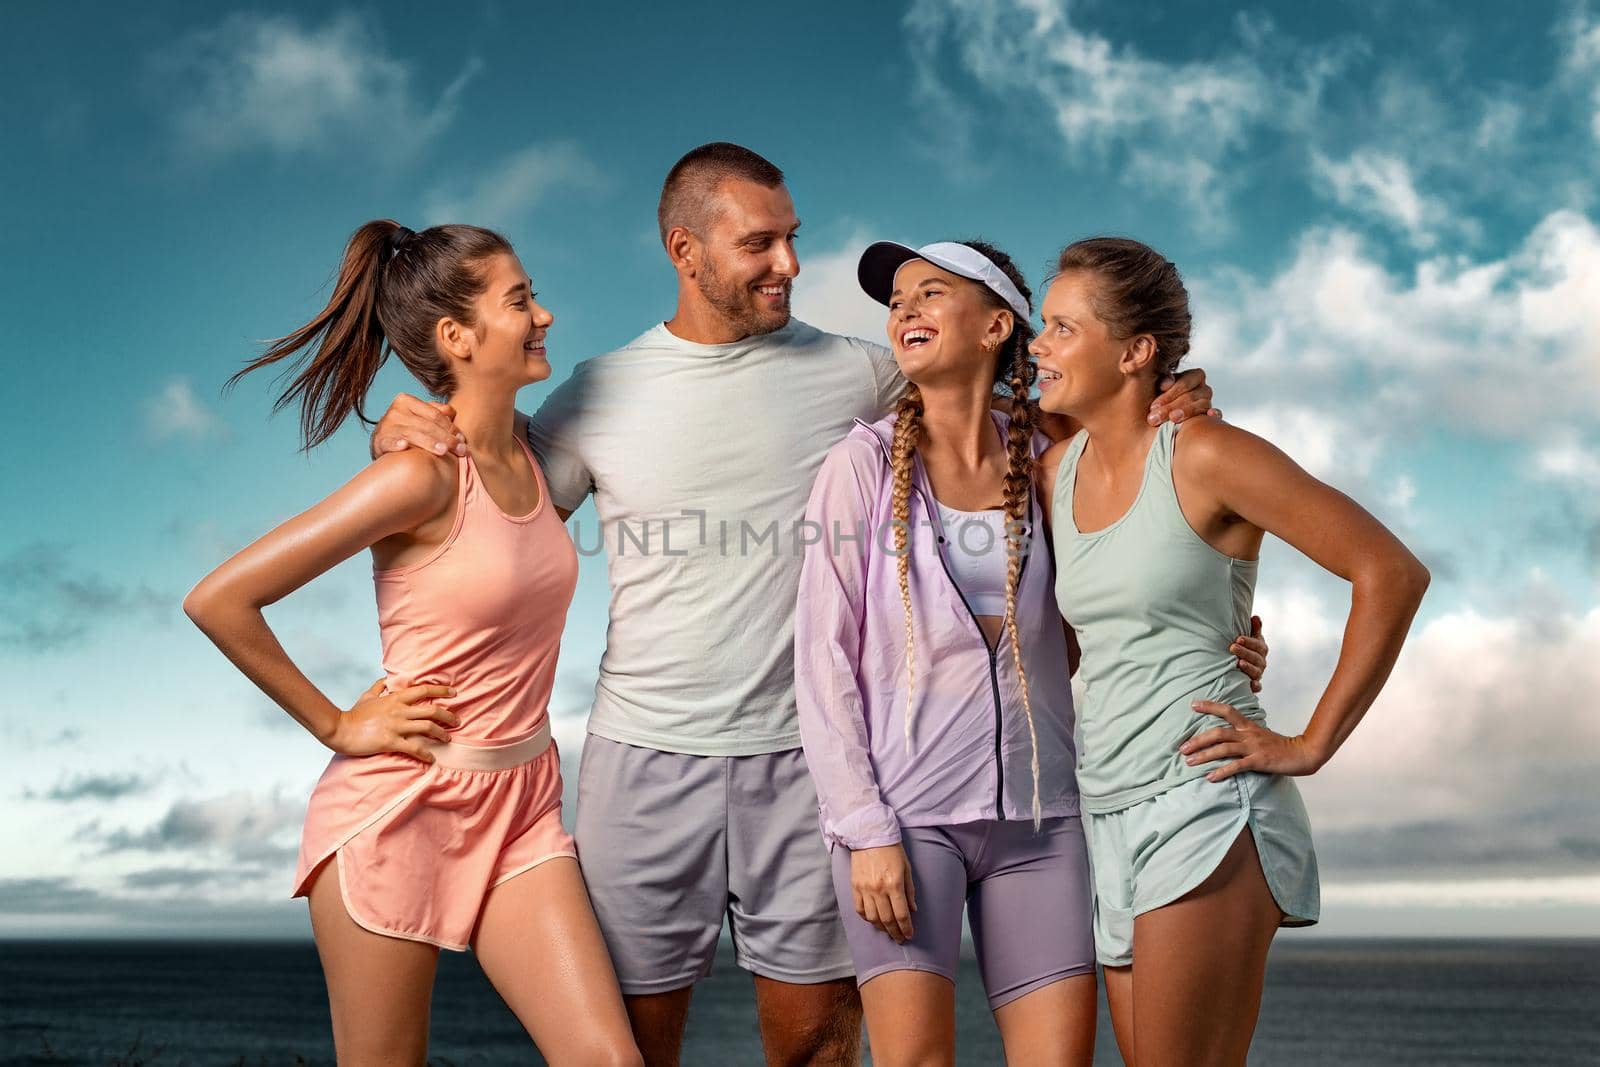 Smiling woman and man fitness team. A happy group of runners rest after running along the sea coast early in the morning